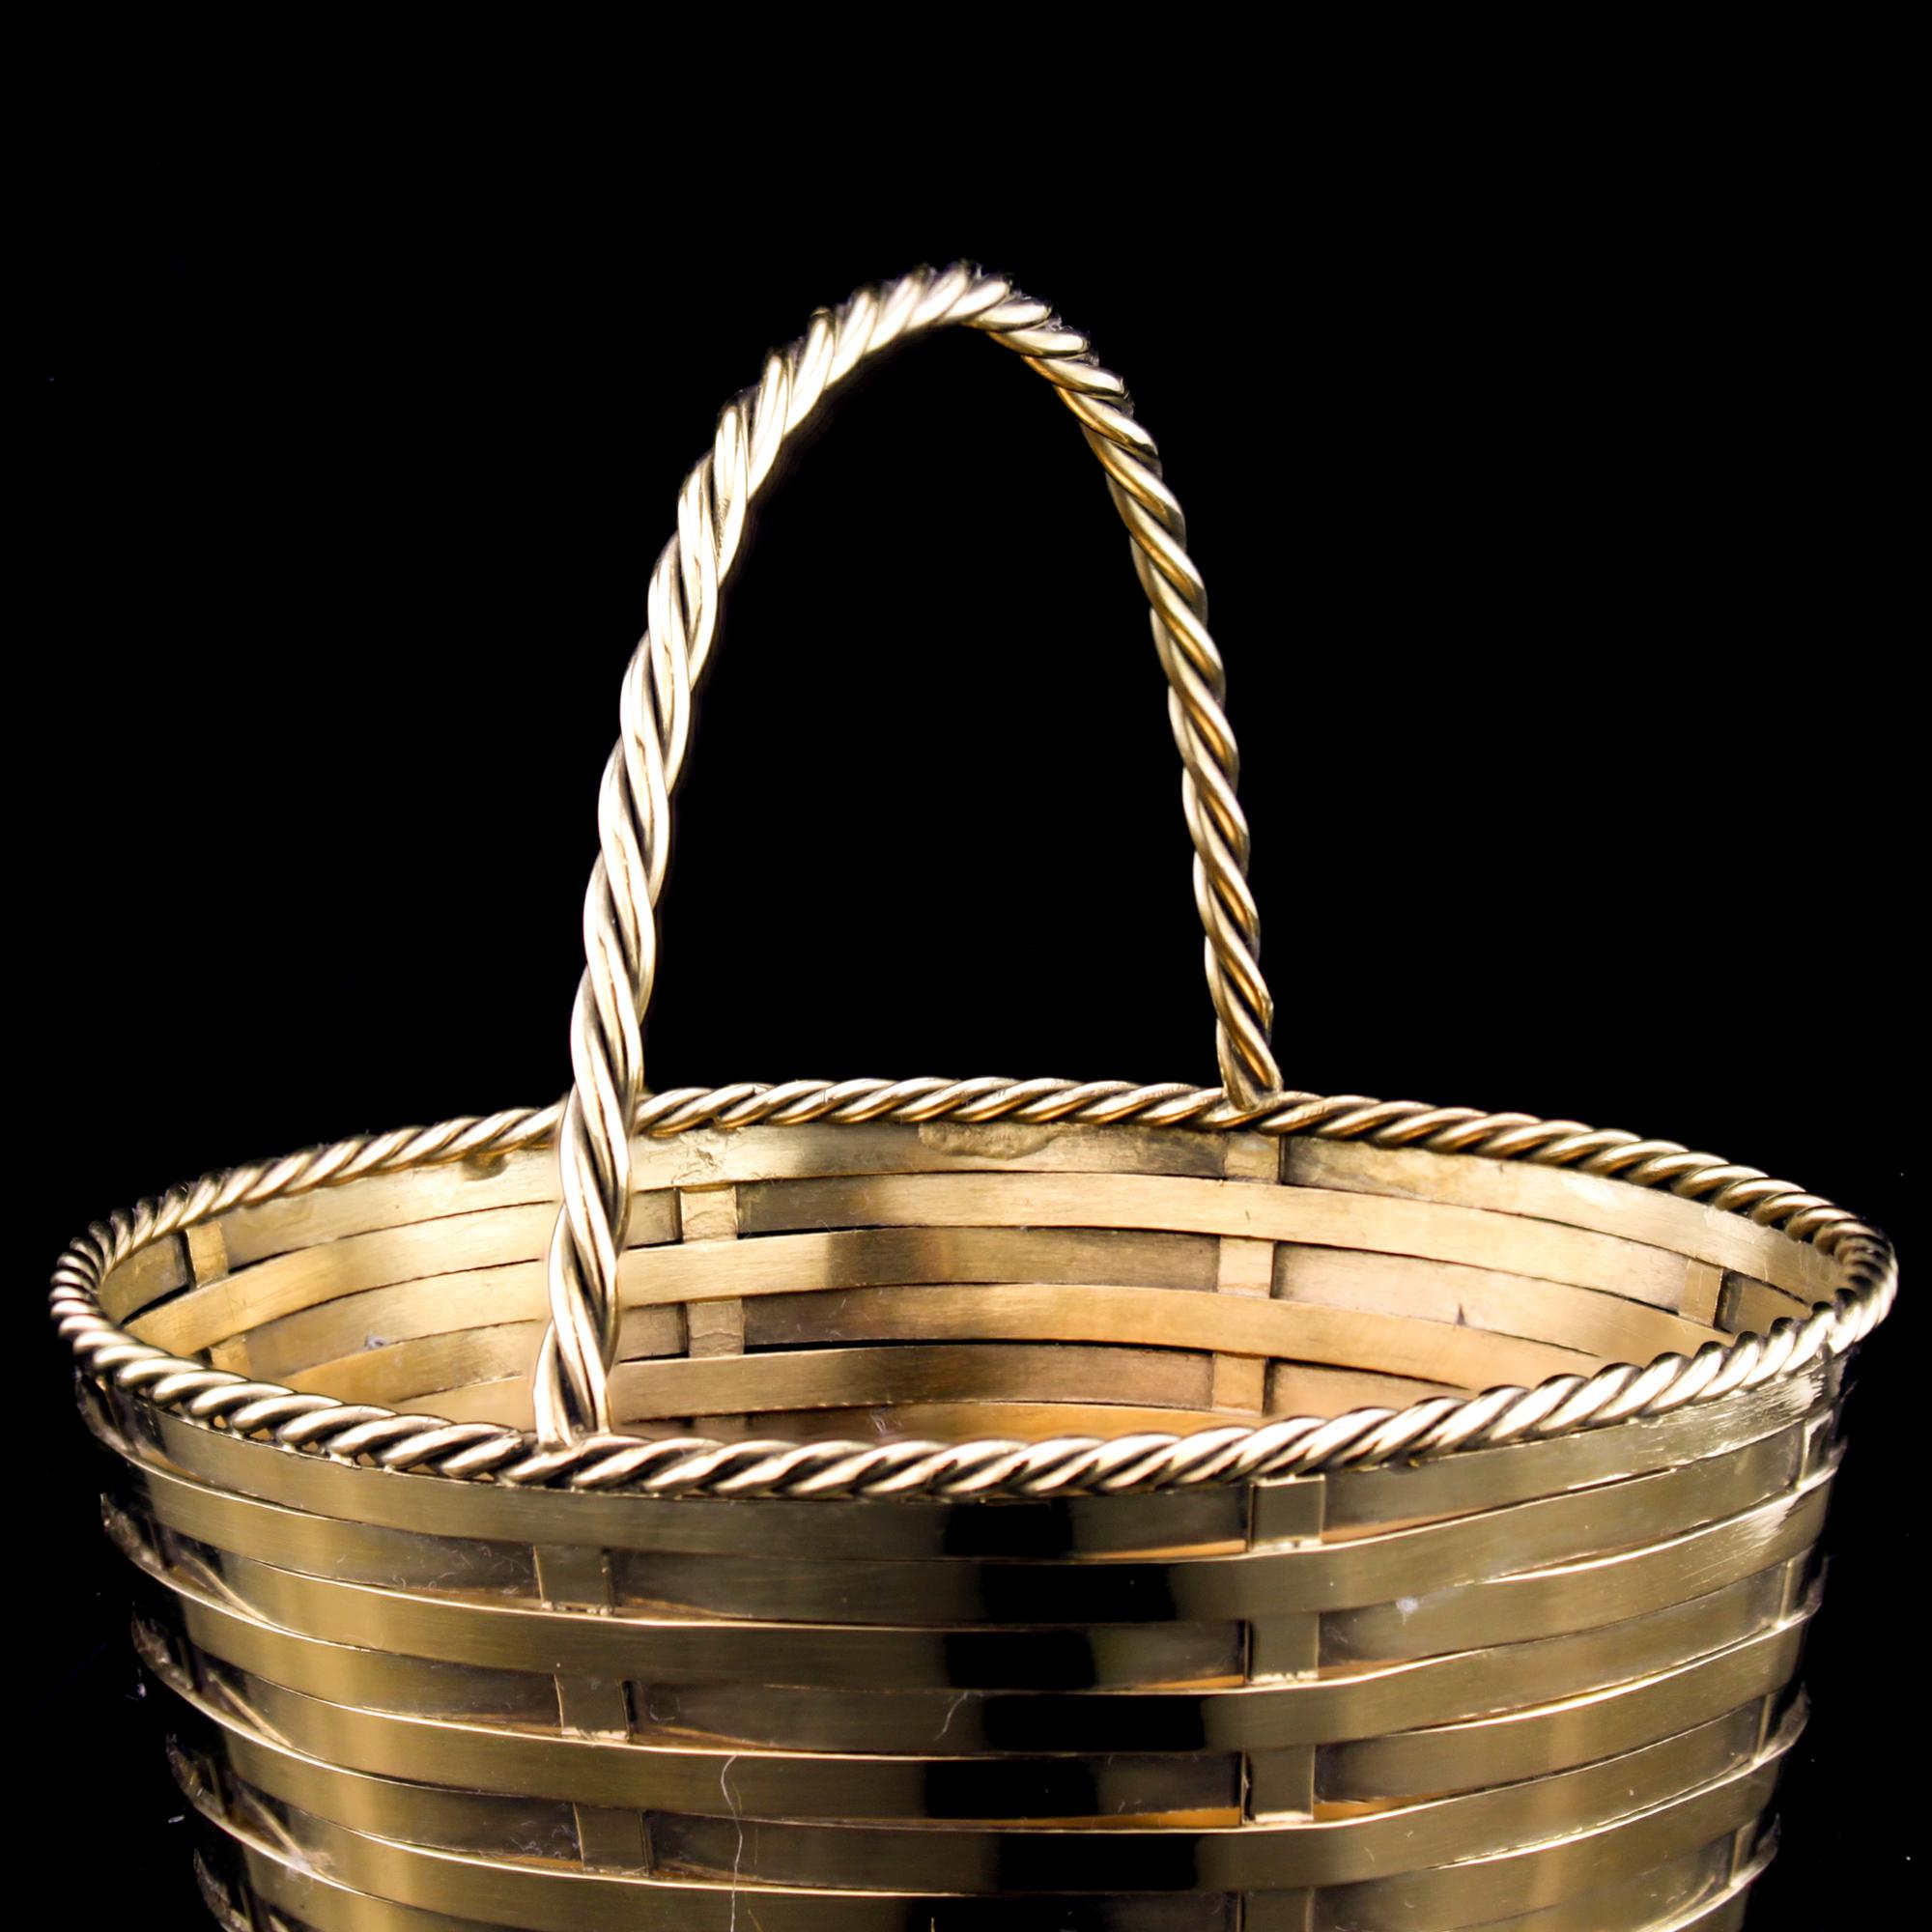 Tiffany & Co Antique Silver Gilt Basket, Early 20th Century For Sale 2